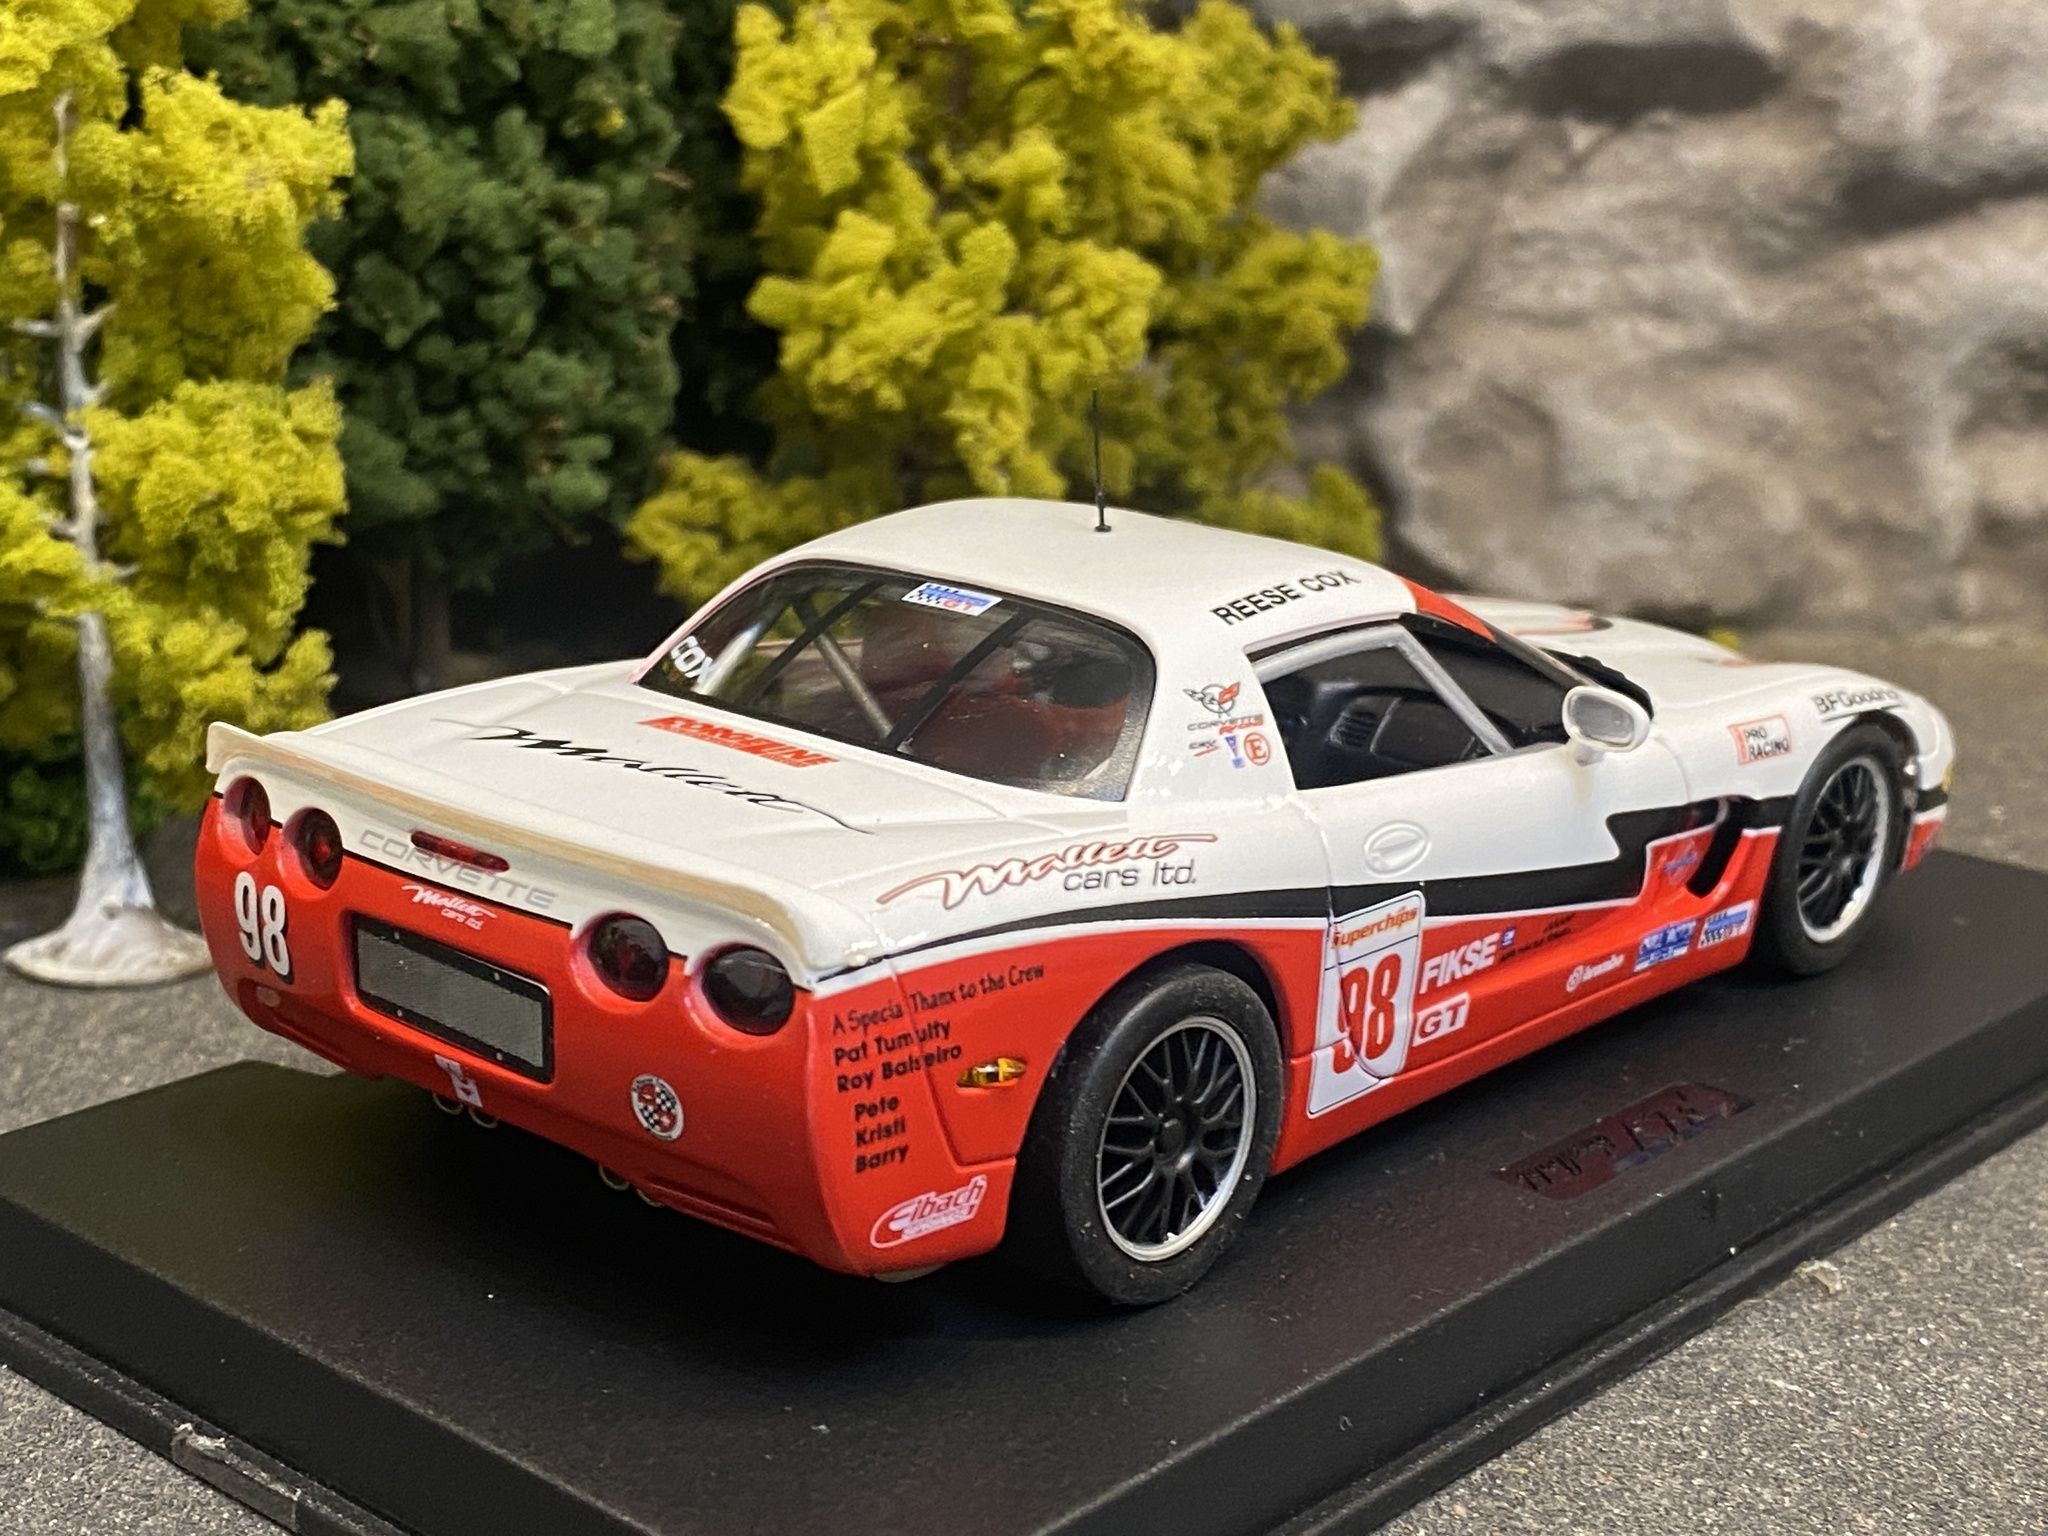 Scale 1/32 Analogue FLY slotcar: Chevrolet Corvette C5, #98, Speedvision GT 2000